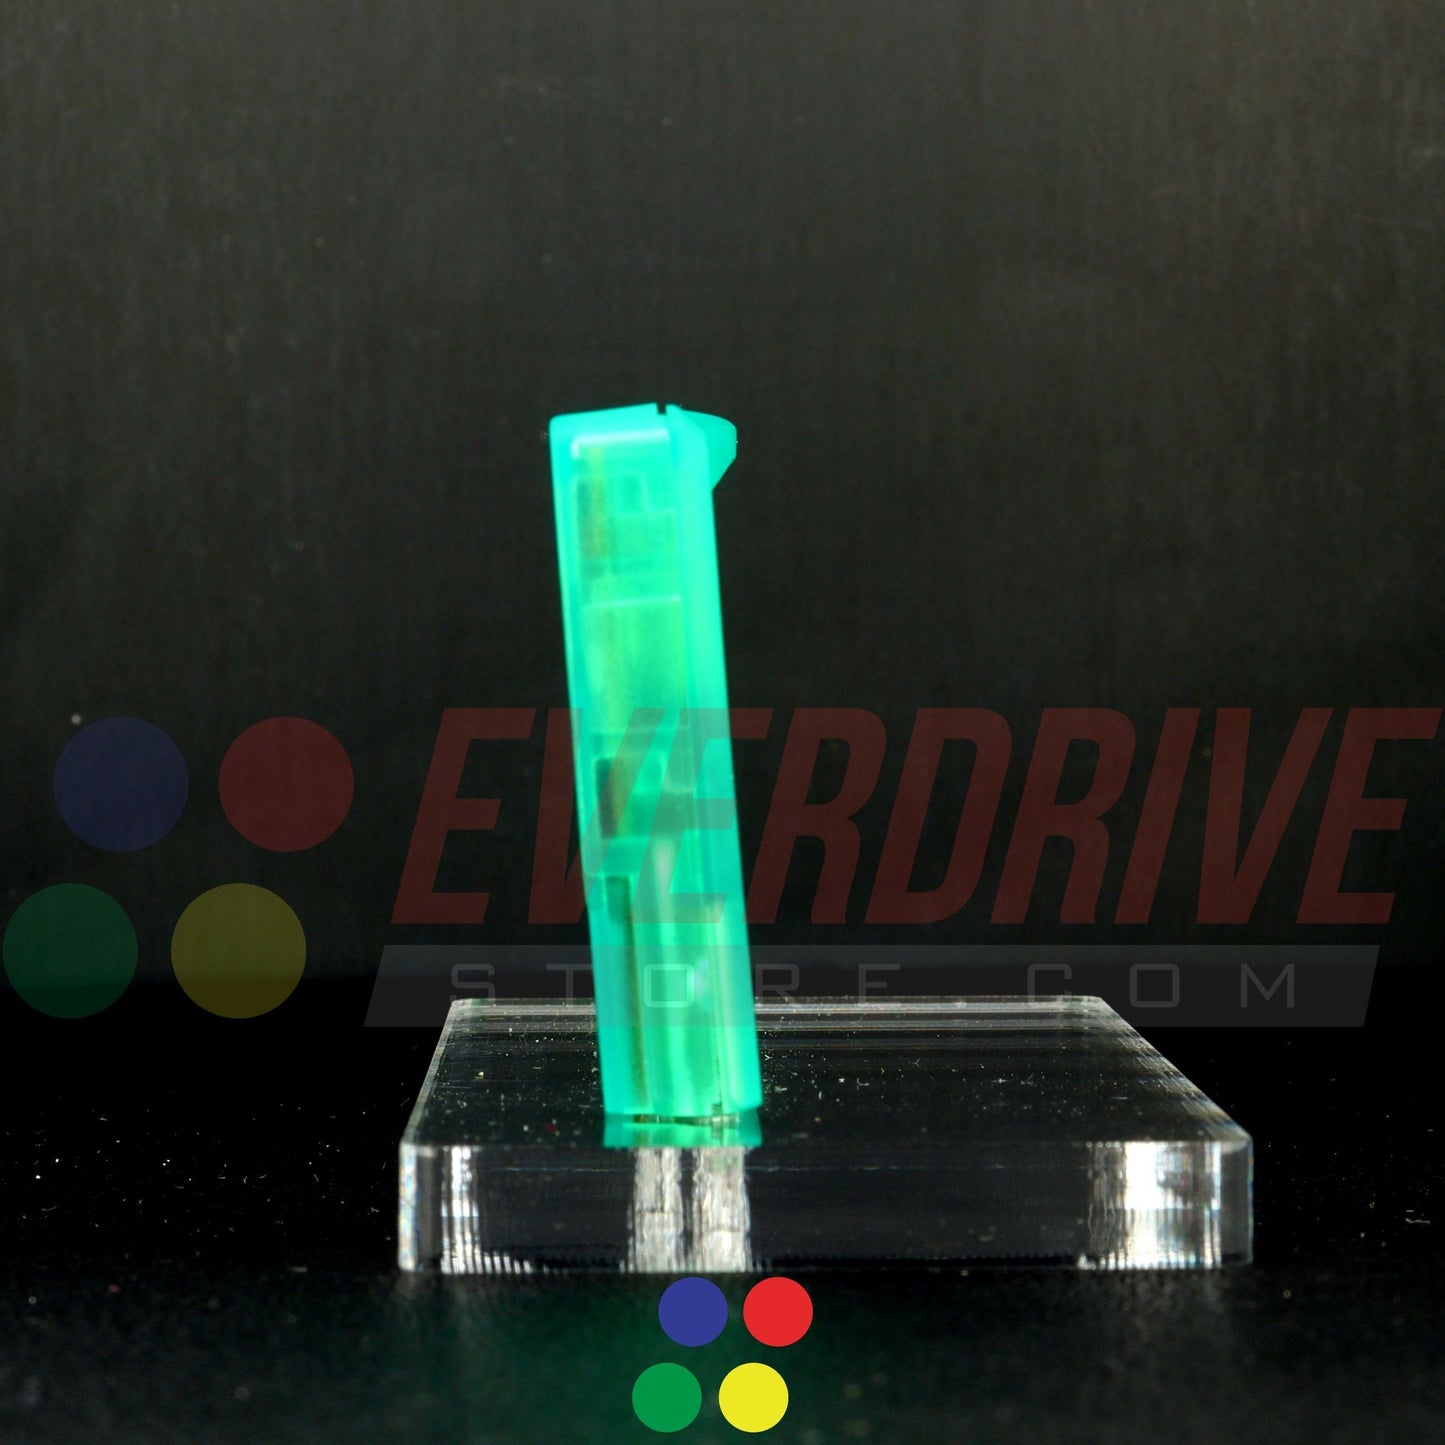 Everdrive GBA Mini - Frosted Green